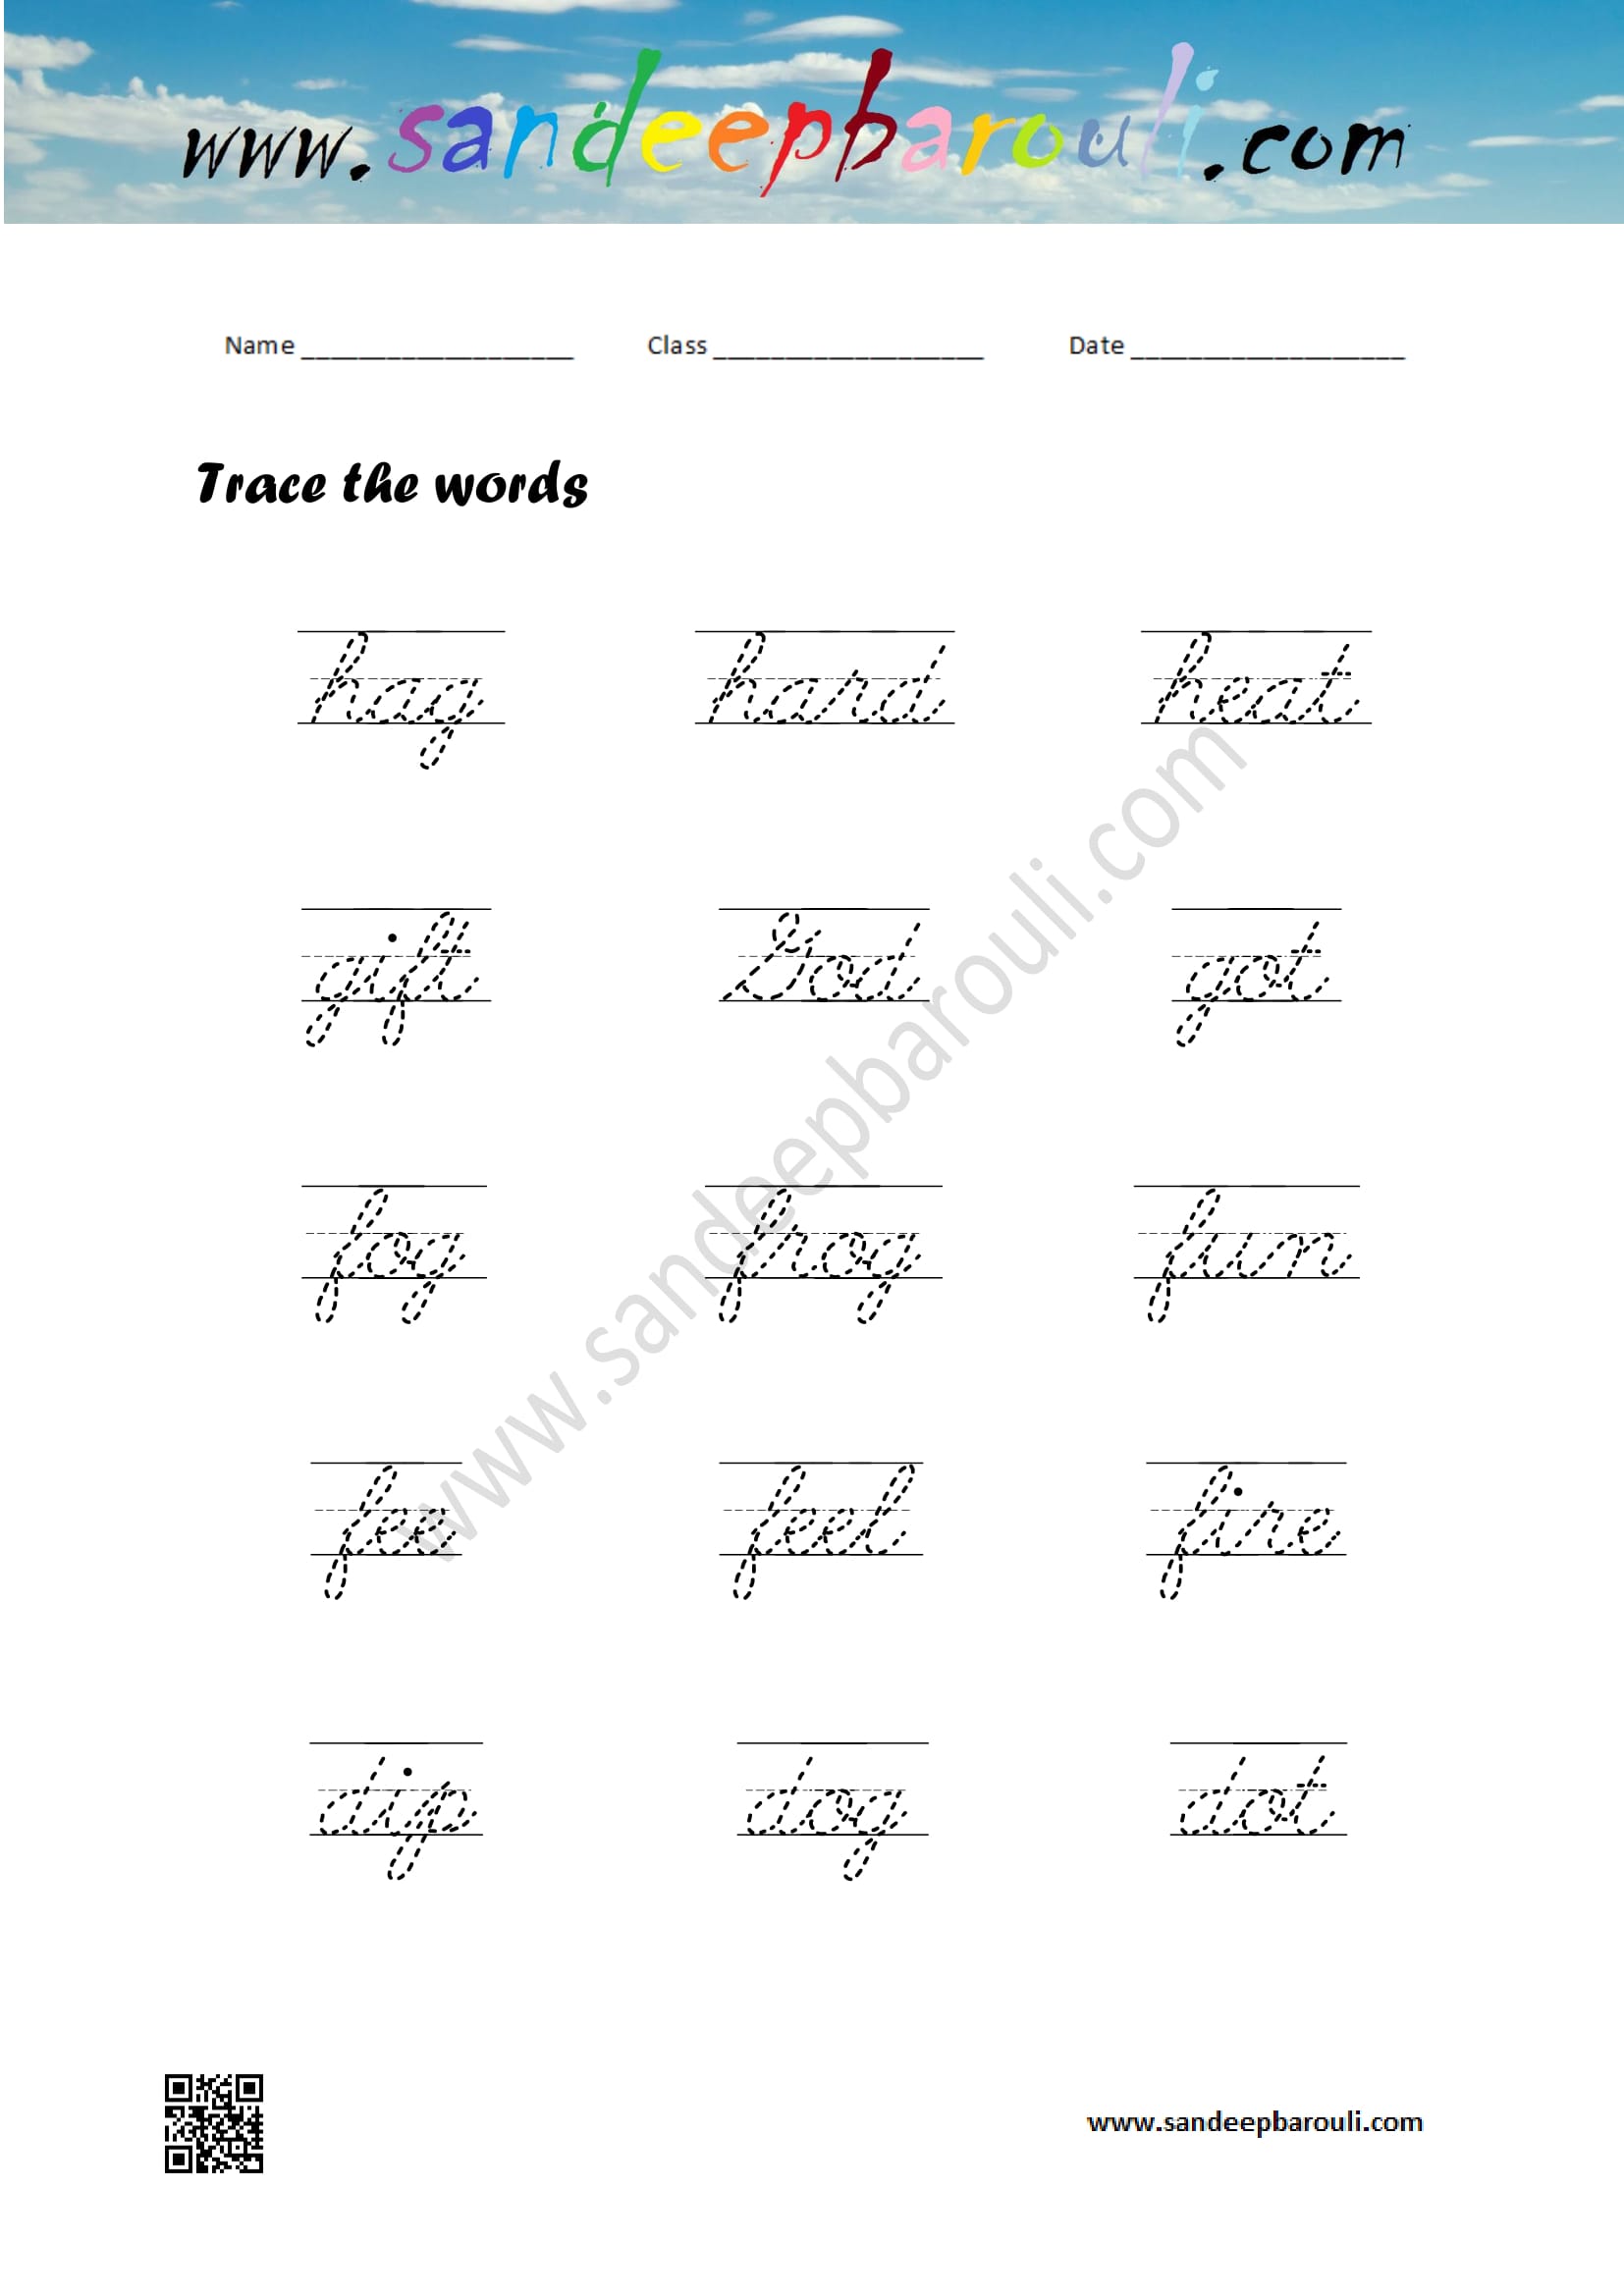 Cursive Writing Worksheet – Trace the words (17)